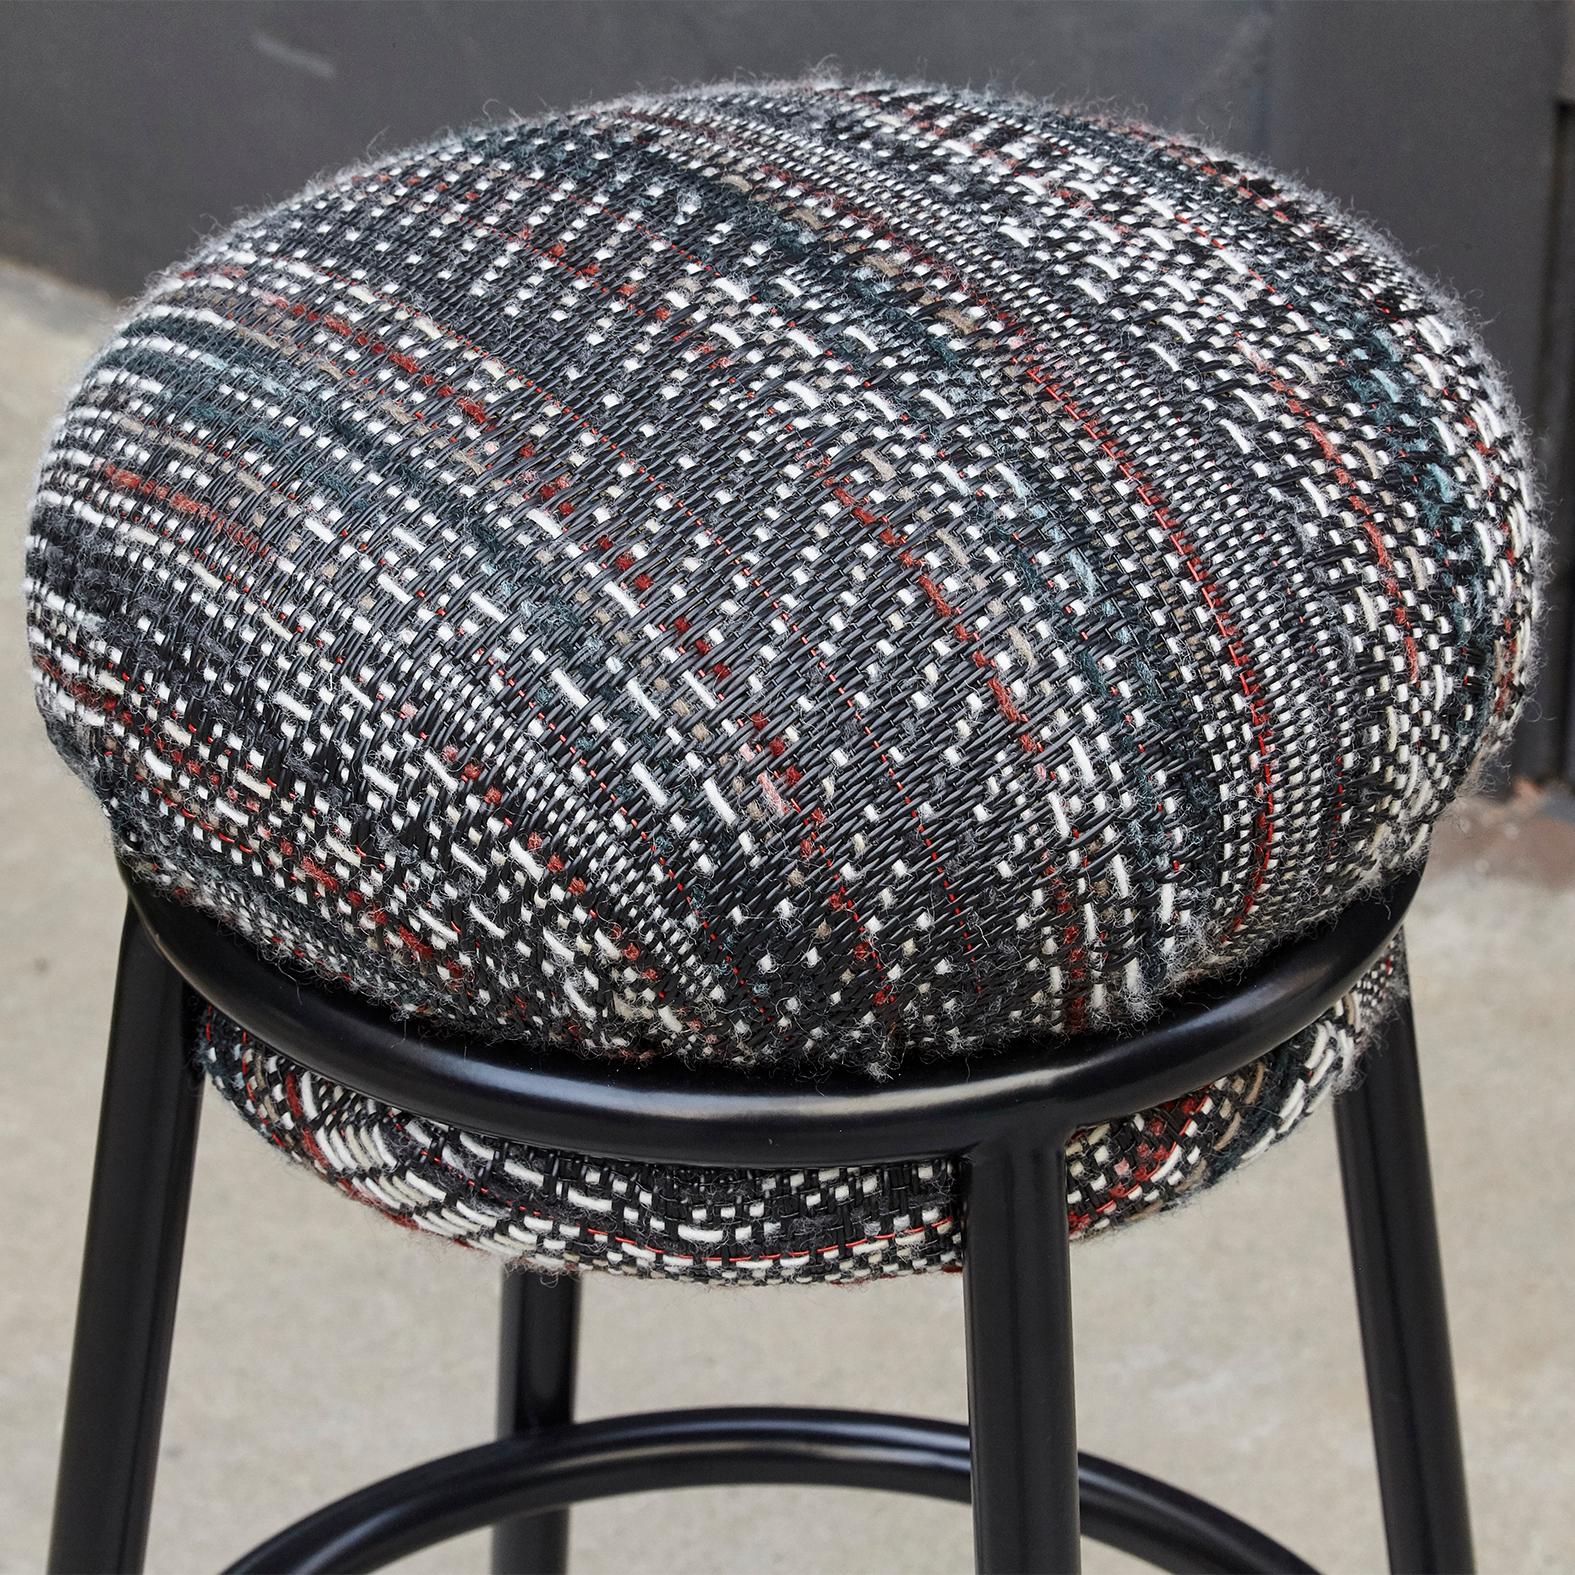 Spanish Stephen Burks Grasso Contemporary Fabric Upholstery, Blac Lacquered Metal Stool